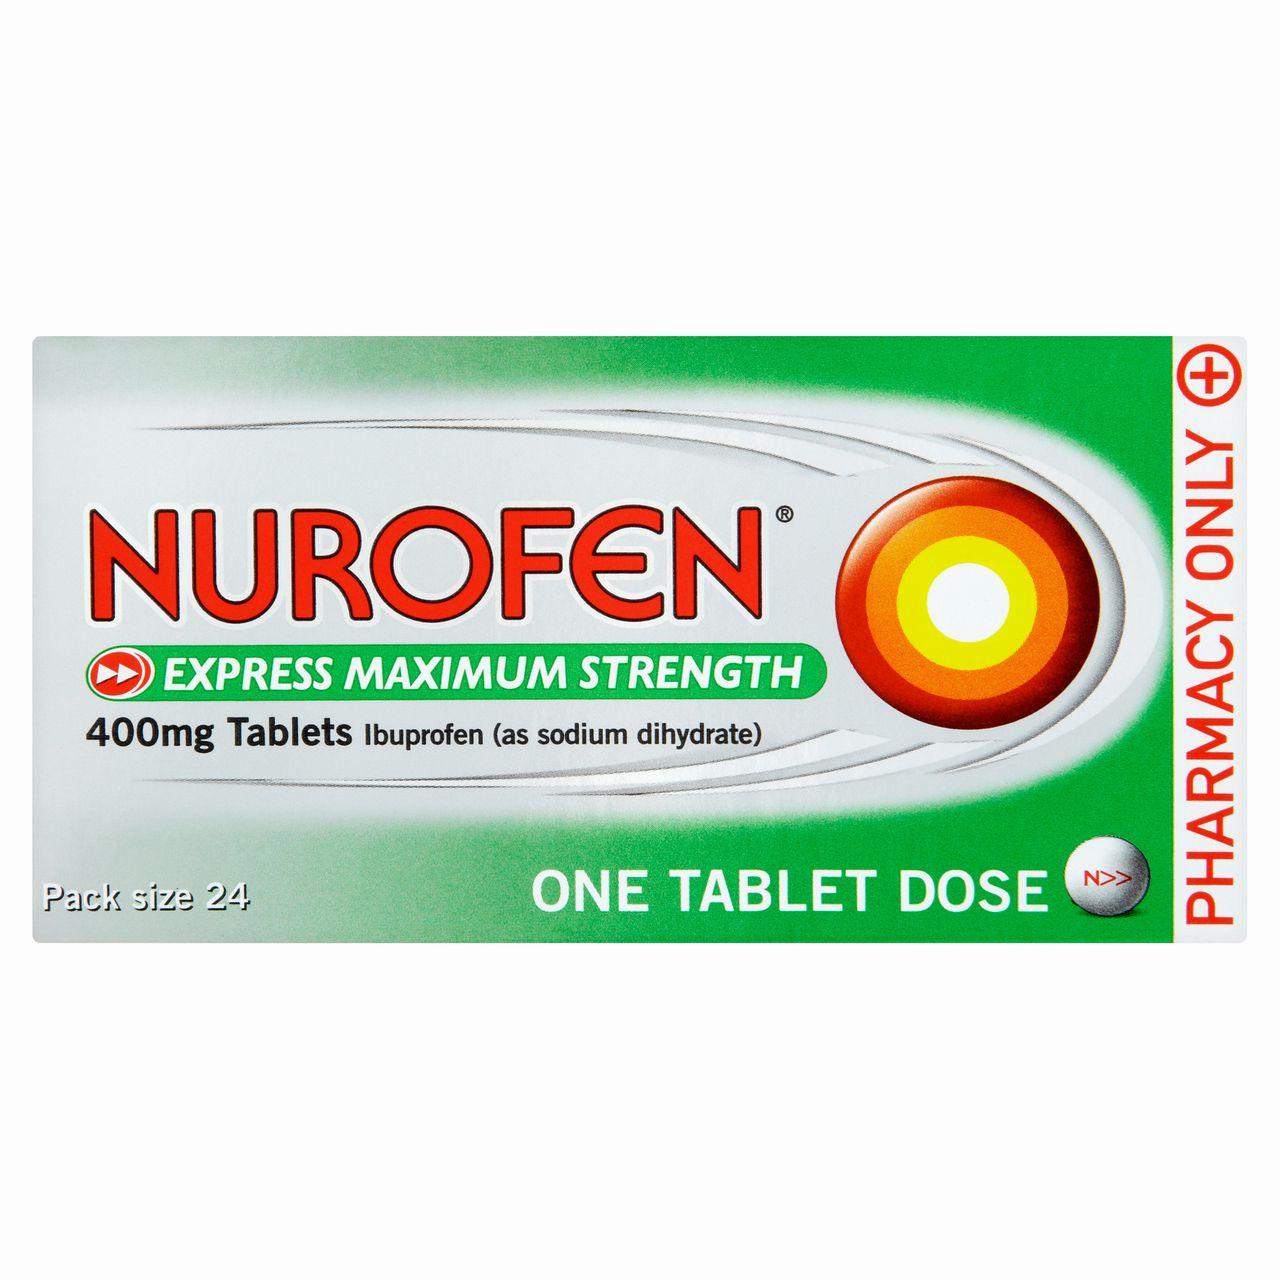 A green and white box of Nurofen Express Maximum Strength 400mg Tablets, containing 24 tablets of ibuprofen sodium dihydrate.